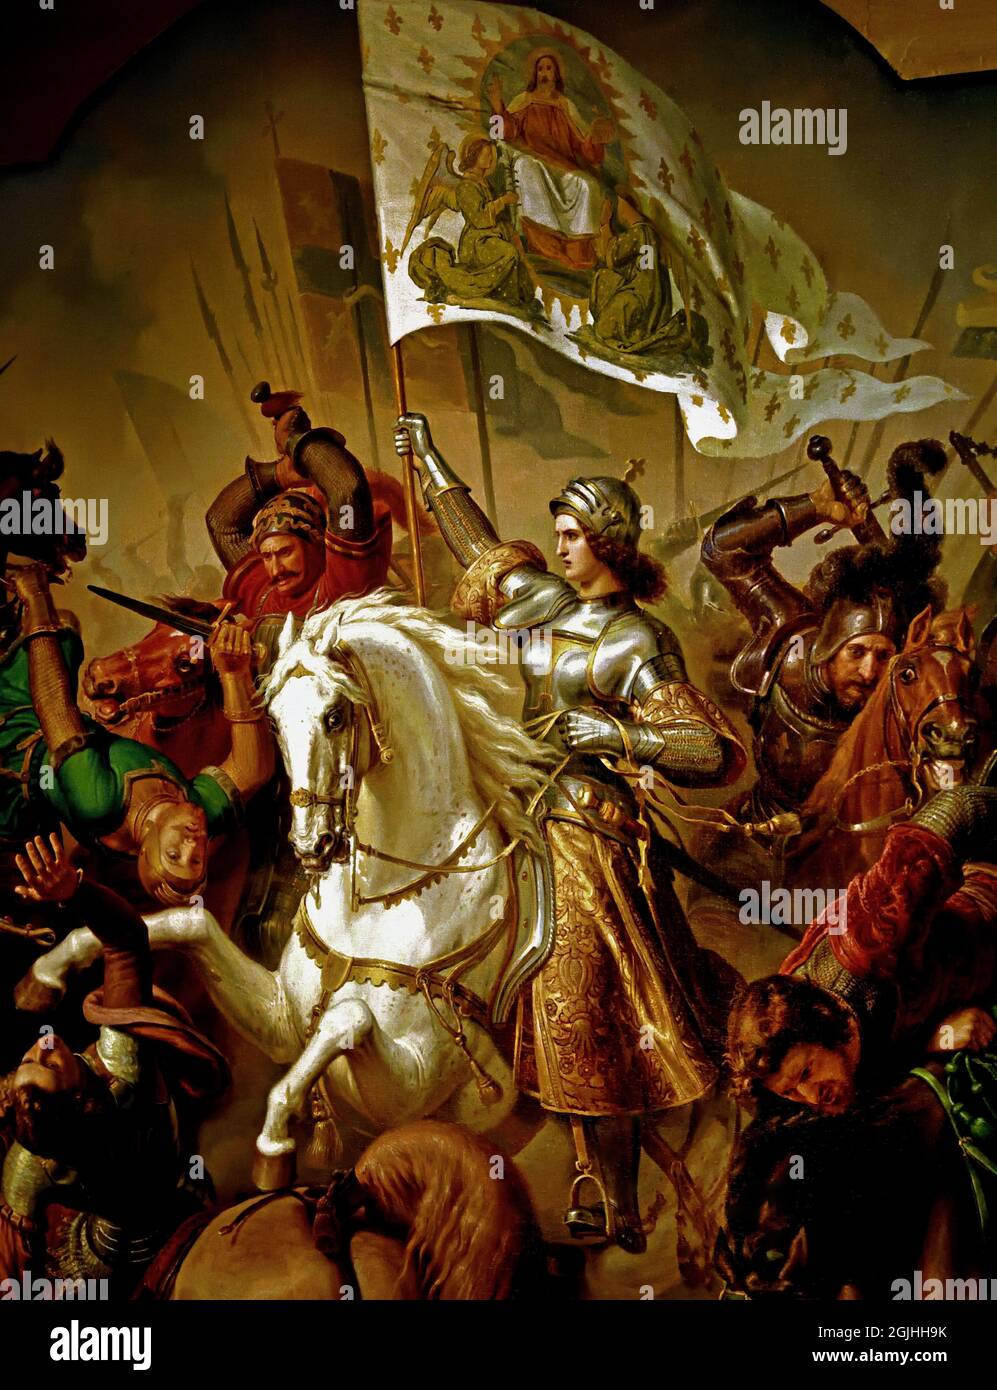 Jeanne D`Arc in battle (Middle panel of the life of Jeanne D`Arc), 1843 France French ( Joan of Arc, The Maid of Orléans, heroine of France for her role during the Lancastrian phase of the Hundred Years' War, canonized as a saint. ) Stock Photo